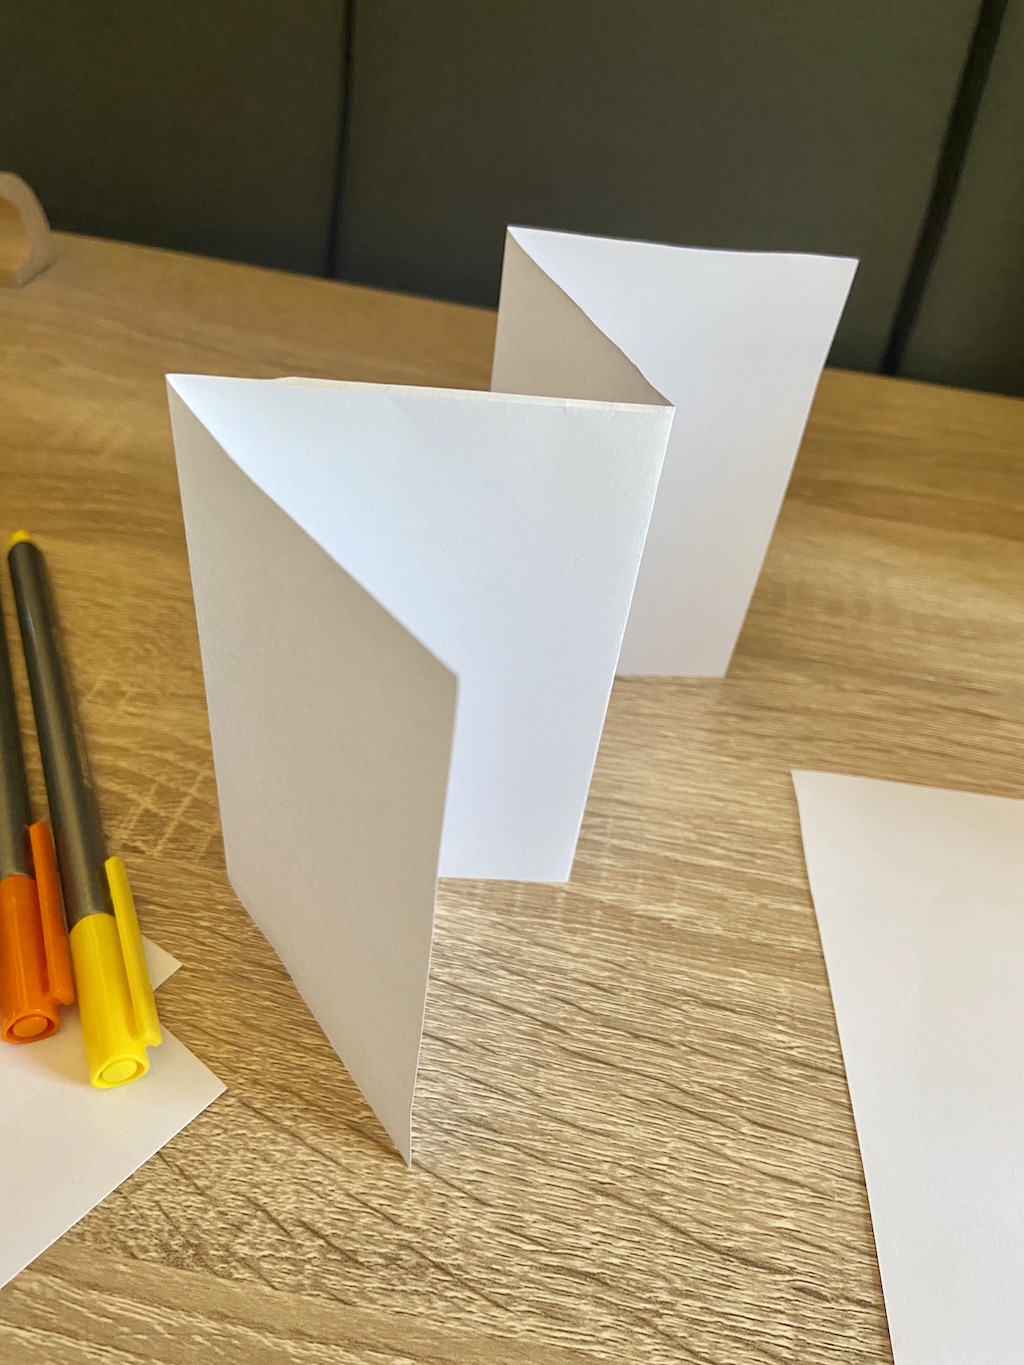 Flip over the paper and do the same fold. Your paper should now look like a W.